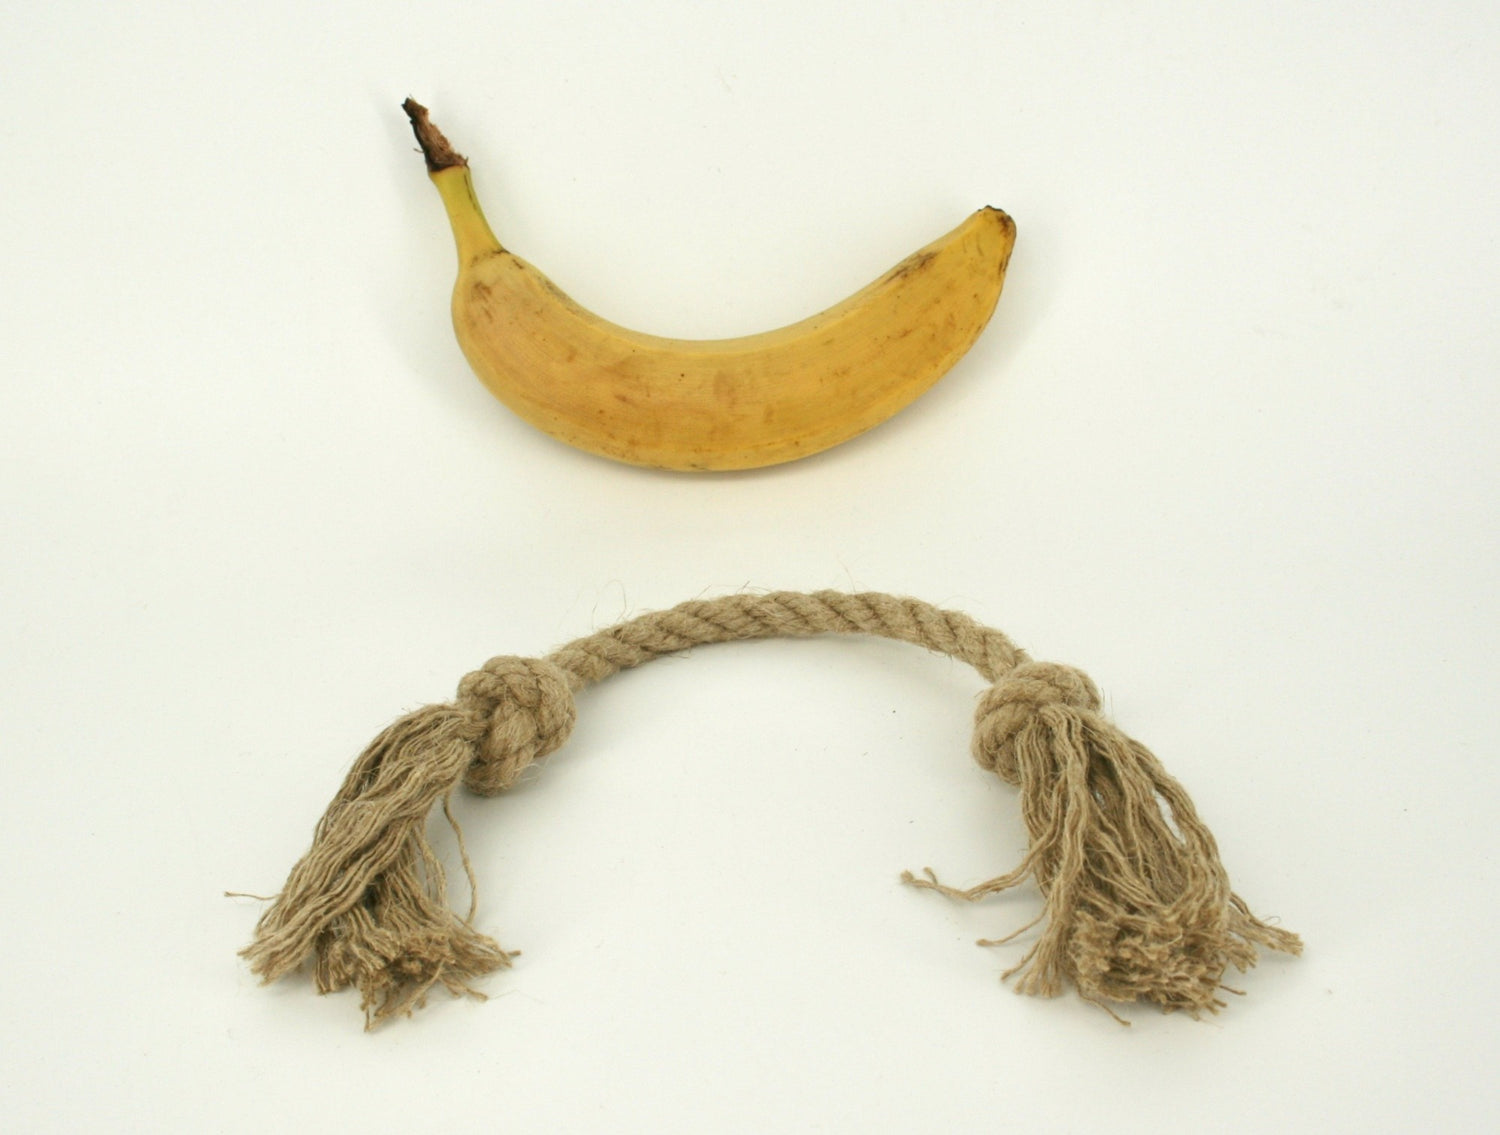 Small hemp rope dog toy banana for comparison